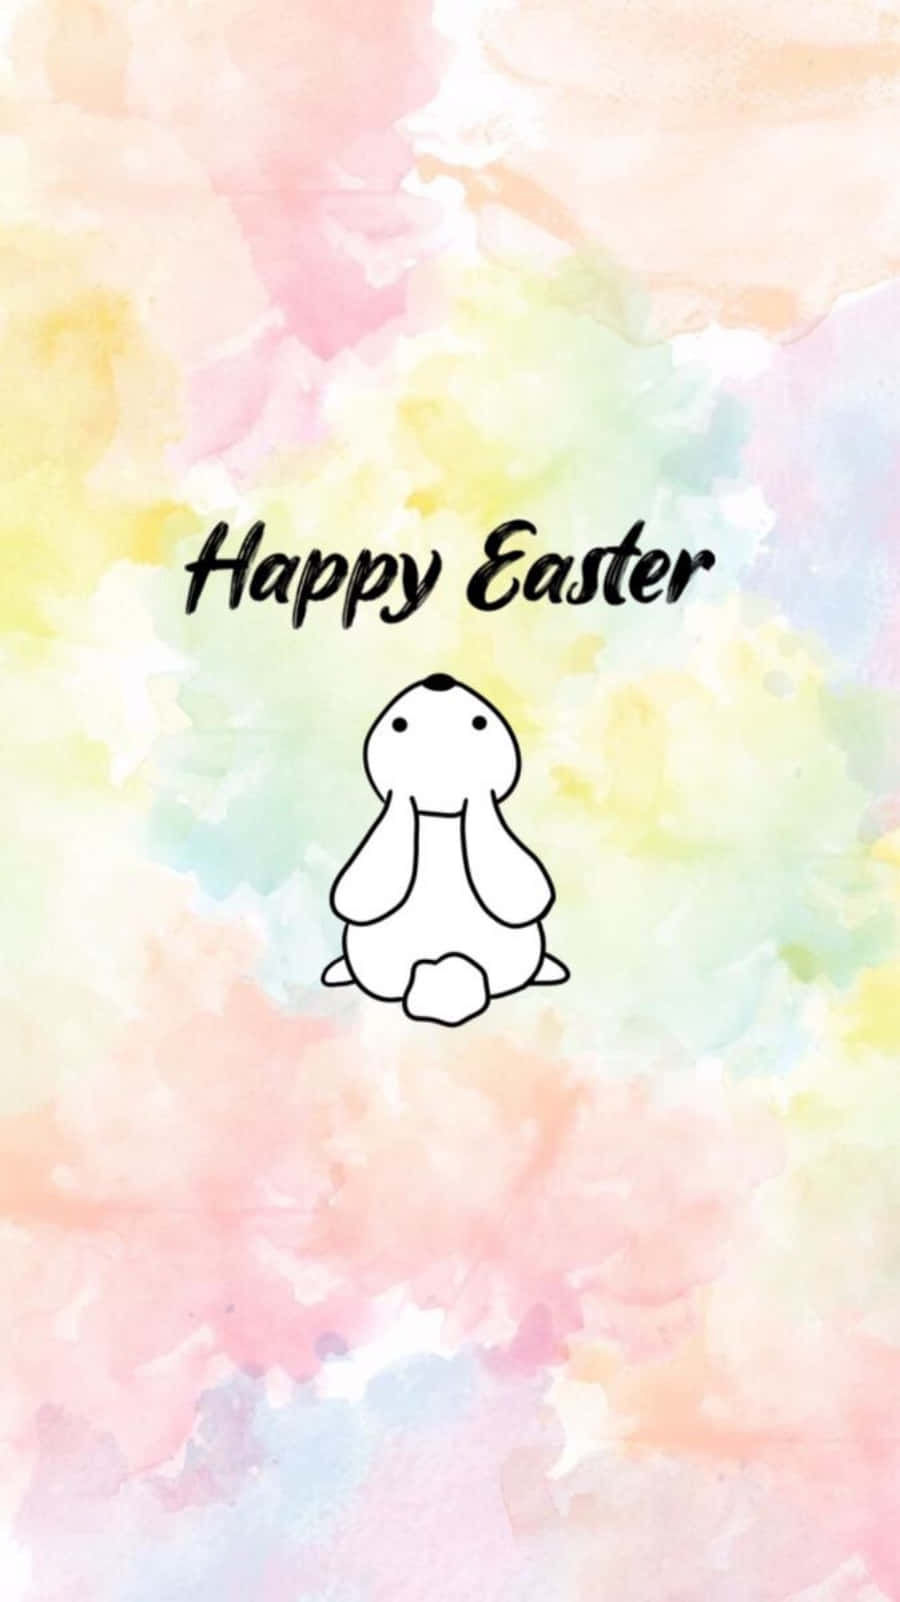 Wishing You a Happy Easter!